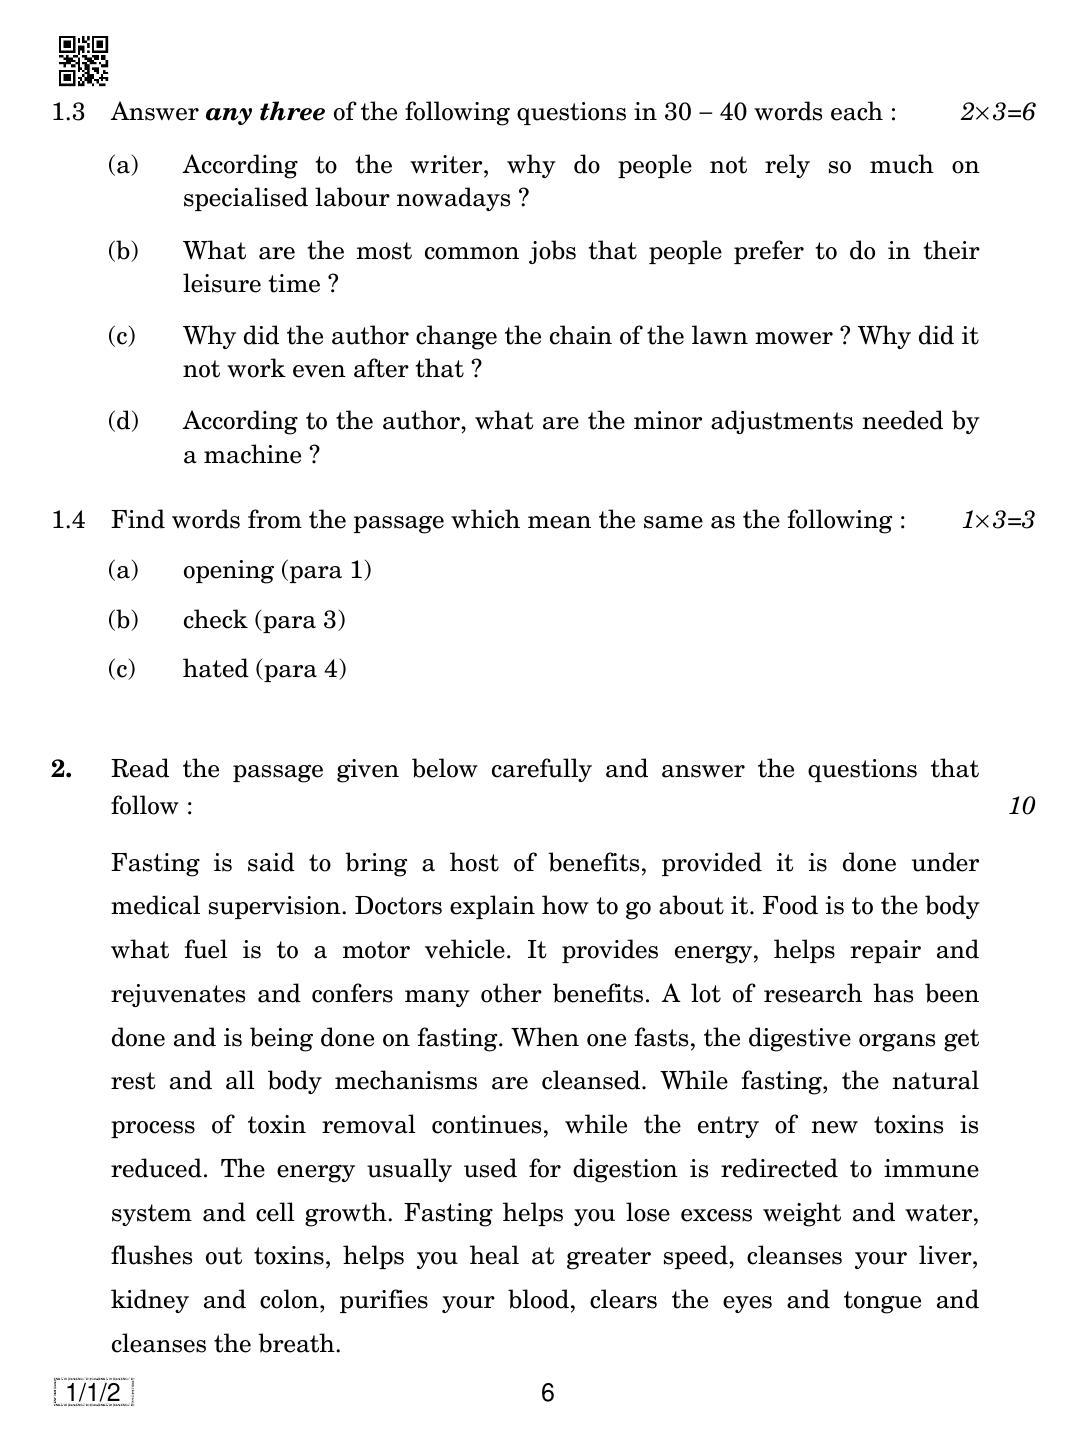 CBSE Class 12 1-1-2 ENGLISH CORE 2019 Compartment Question Paper - Page 6